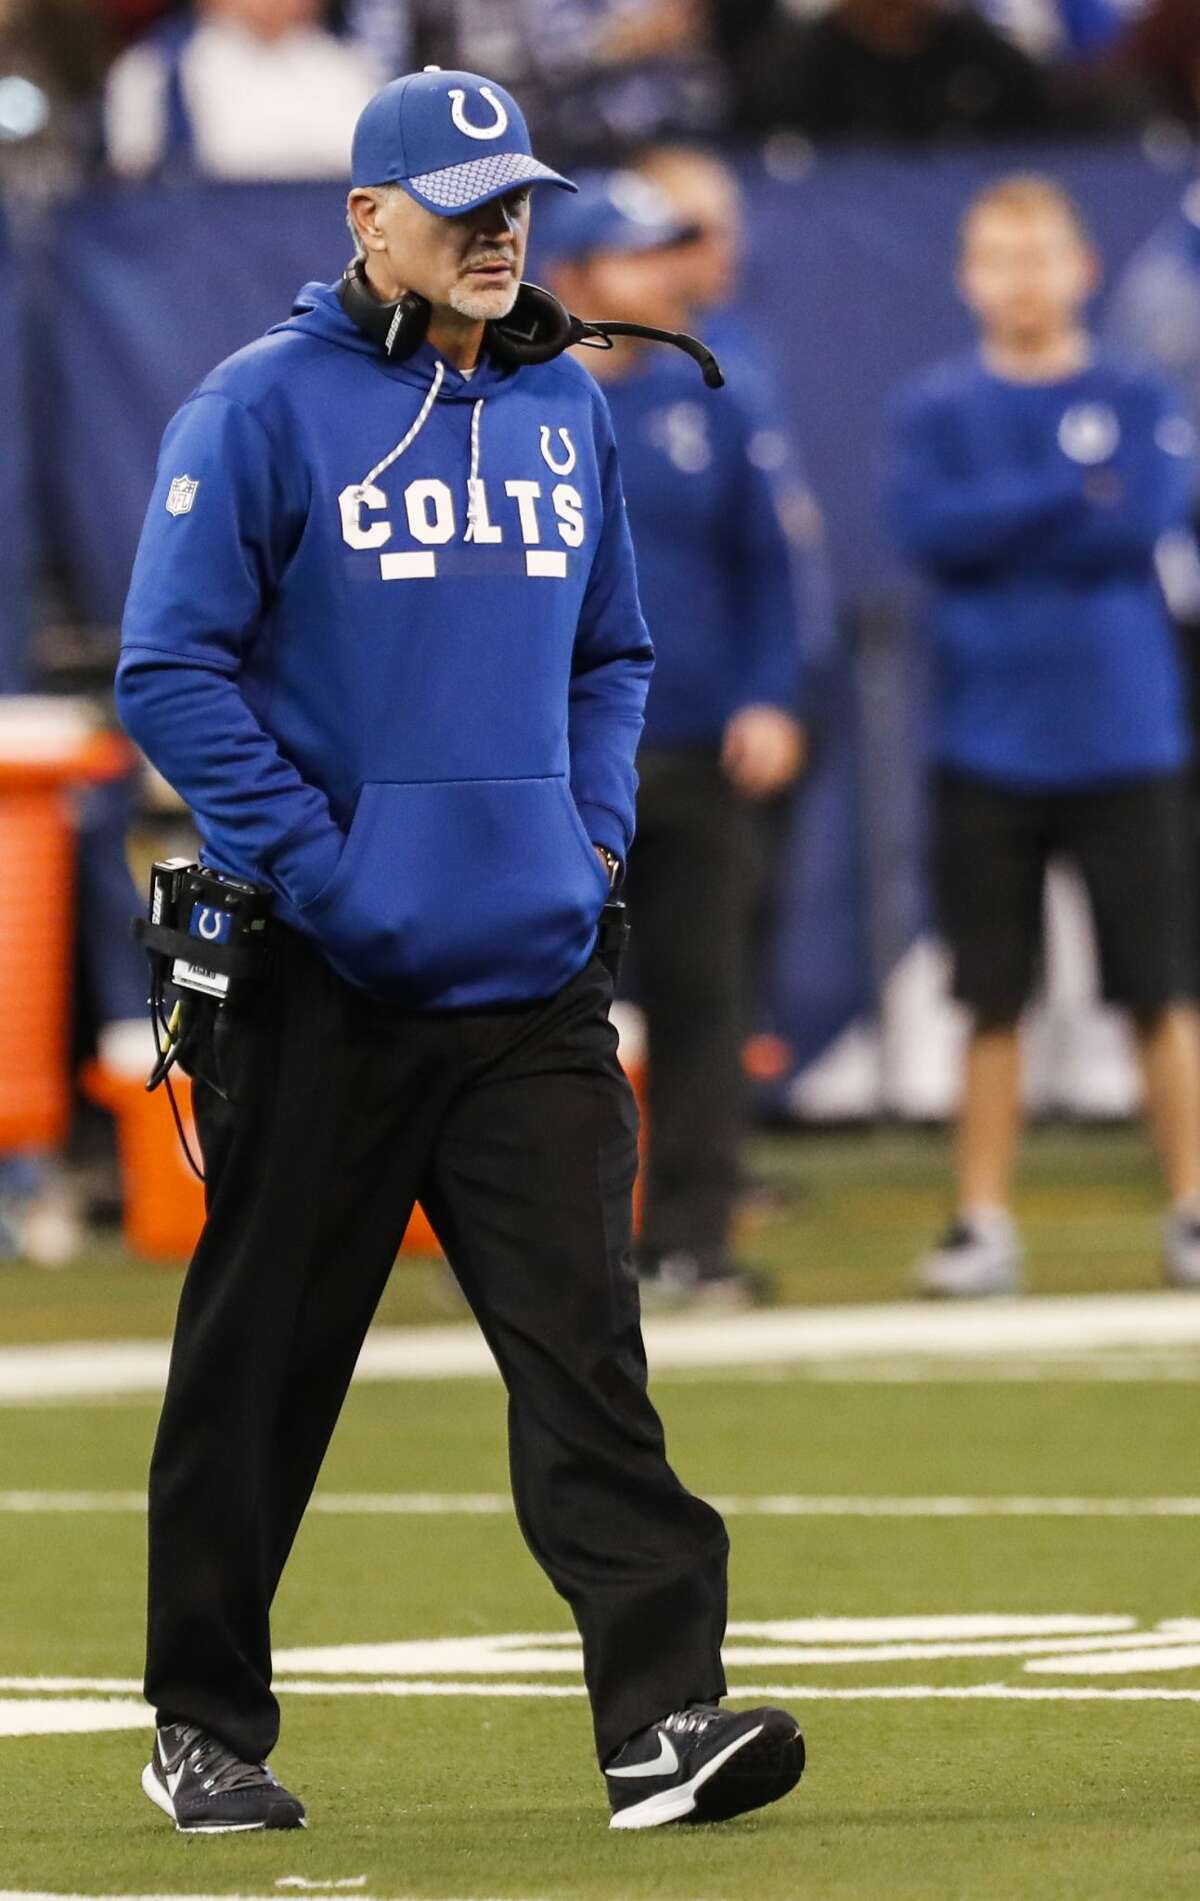 Indianapolis Colts head coach Chuck Pagano walks across the field during the fourth quarter of an NFL football game against the Houston Texans at Lucas Oil Stadium on Sunday, Dec. 31, 2017, in Indianapolis. ( Brett Coomer / Houston Chronicle )